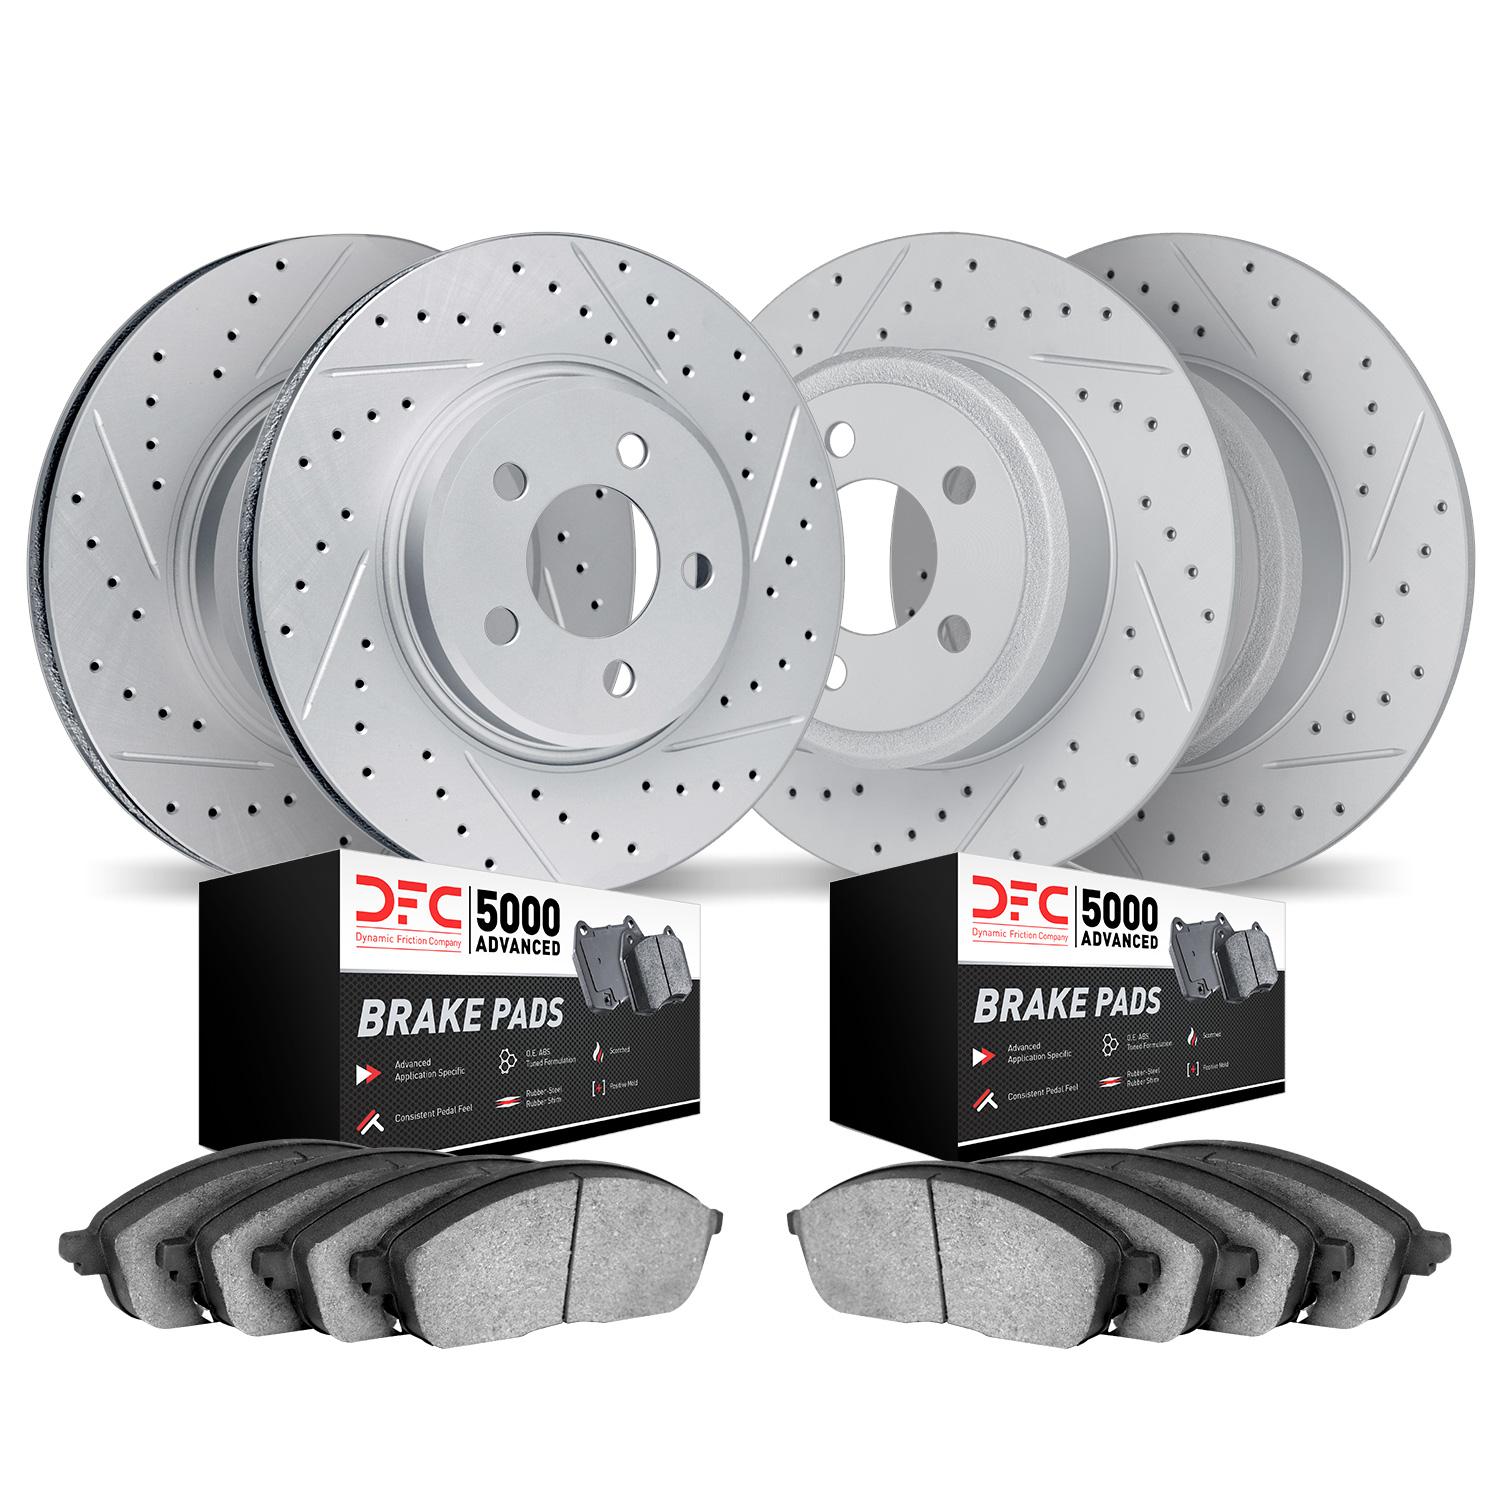 2504-39020 Geoperformance Drilled/Slotted Rotors w/5000 Advanced Brake Pads Kit, 2004-2008 Mopar, Position: Front and Rear